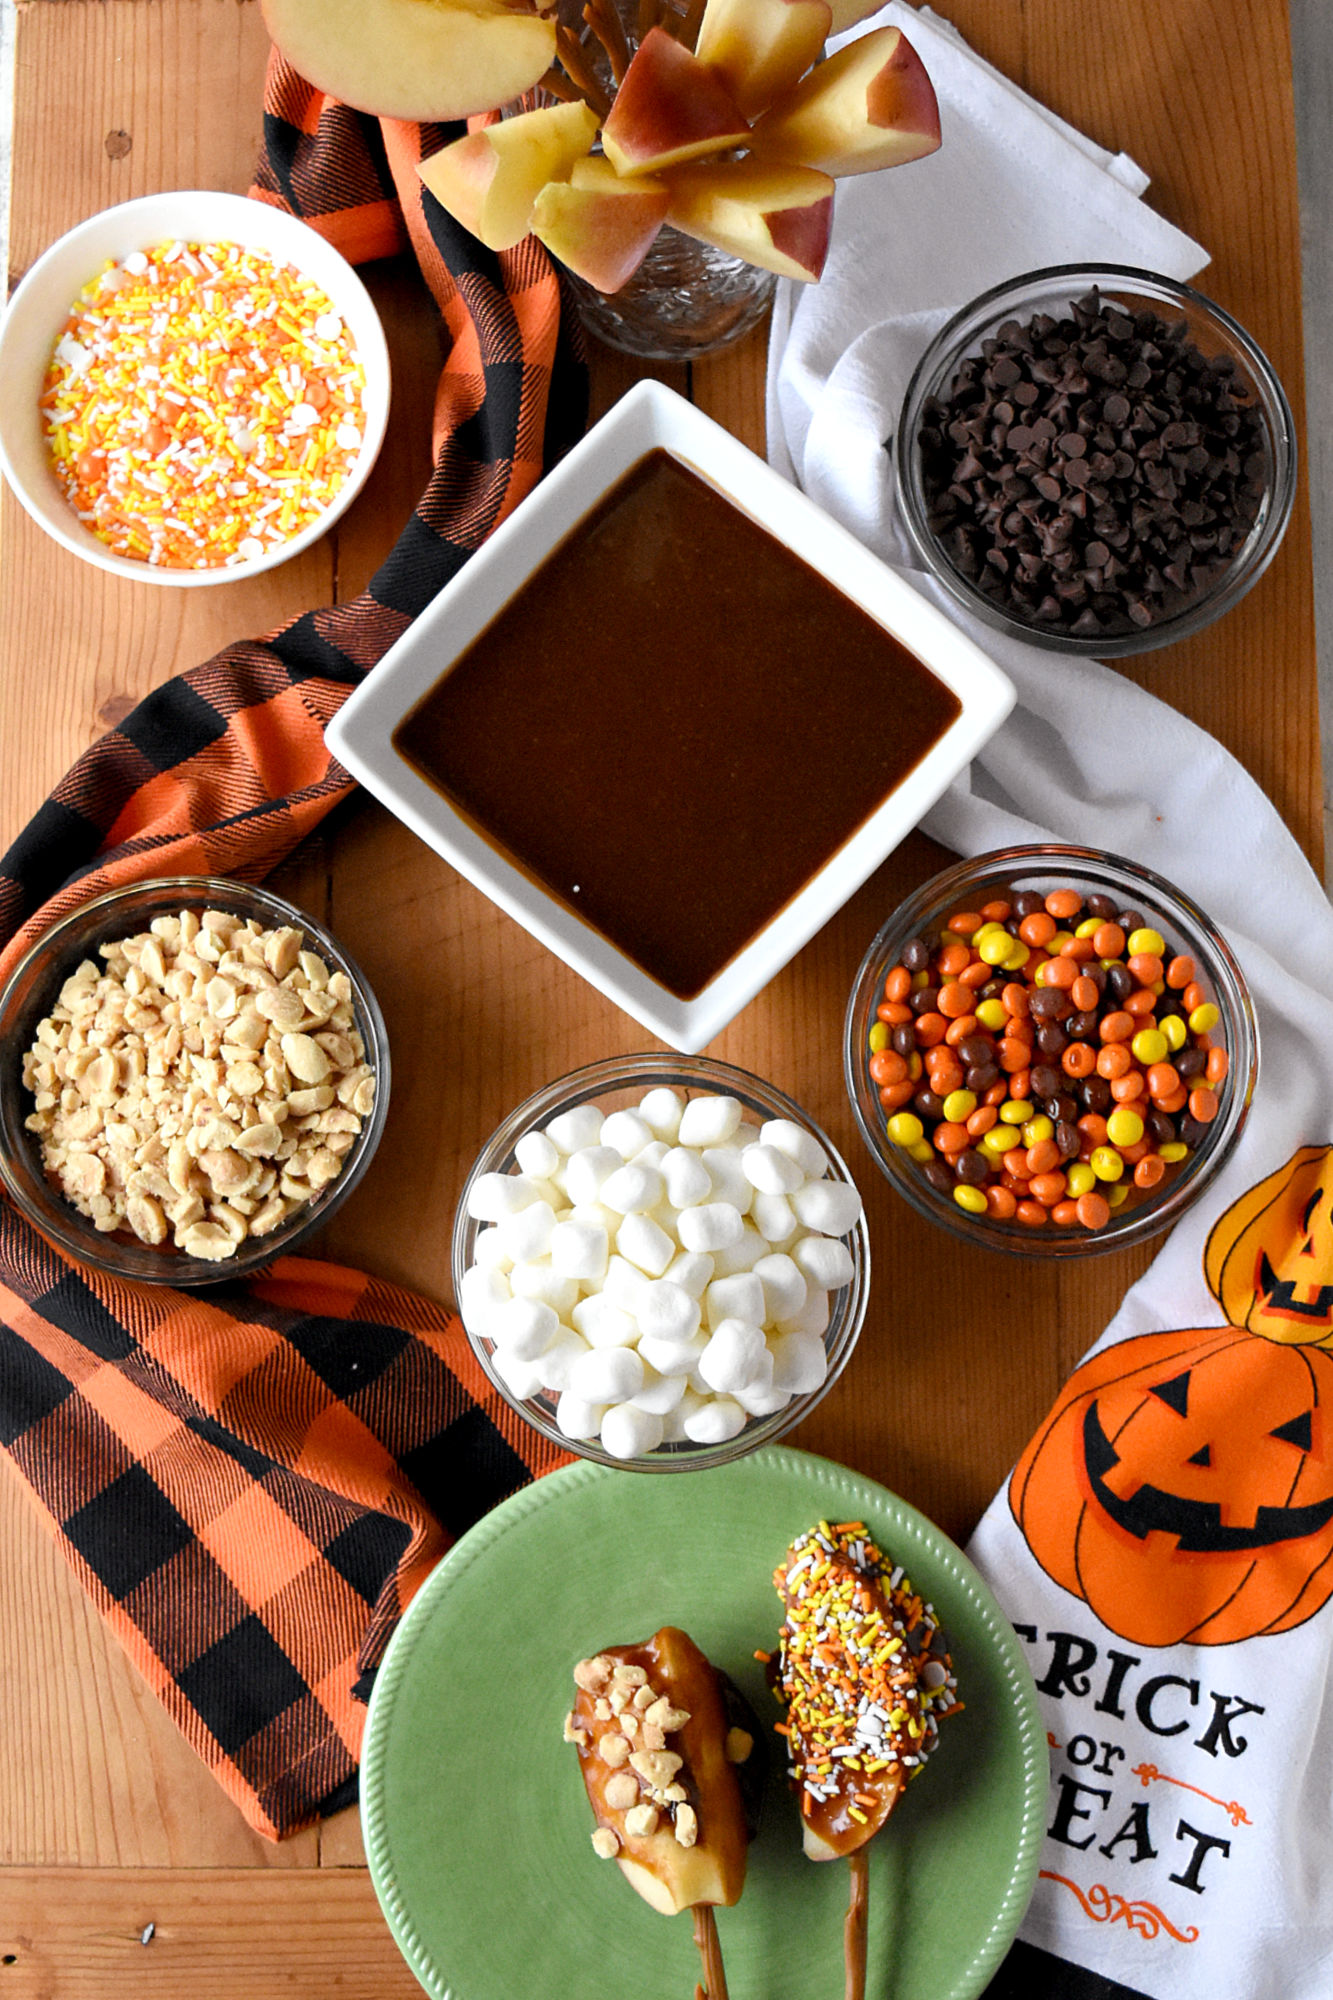 Caramel Apple Board is packed with fun toppings and a delicious peanut butter caramel.  Made with brown sugar, the caramel sauce is simple to make and tastes delicious. #HalloweenTreatsWeek